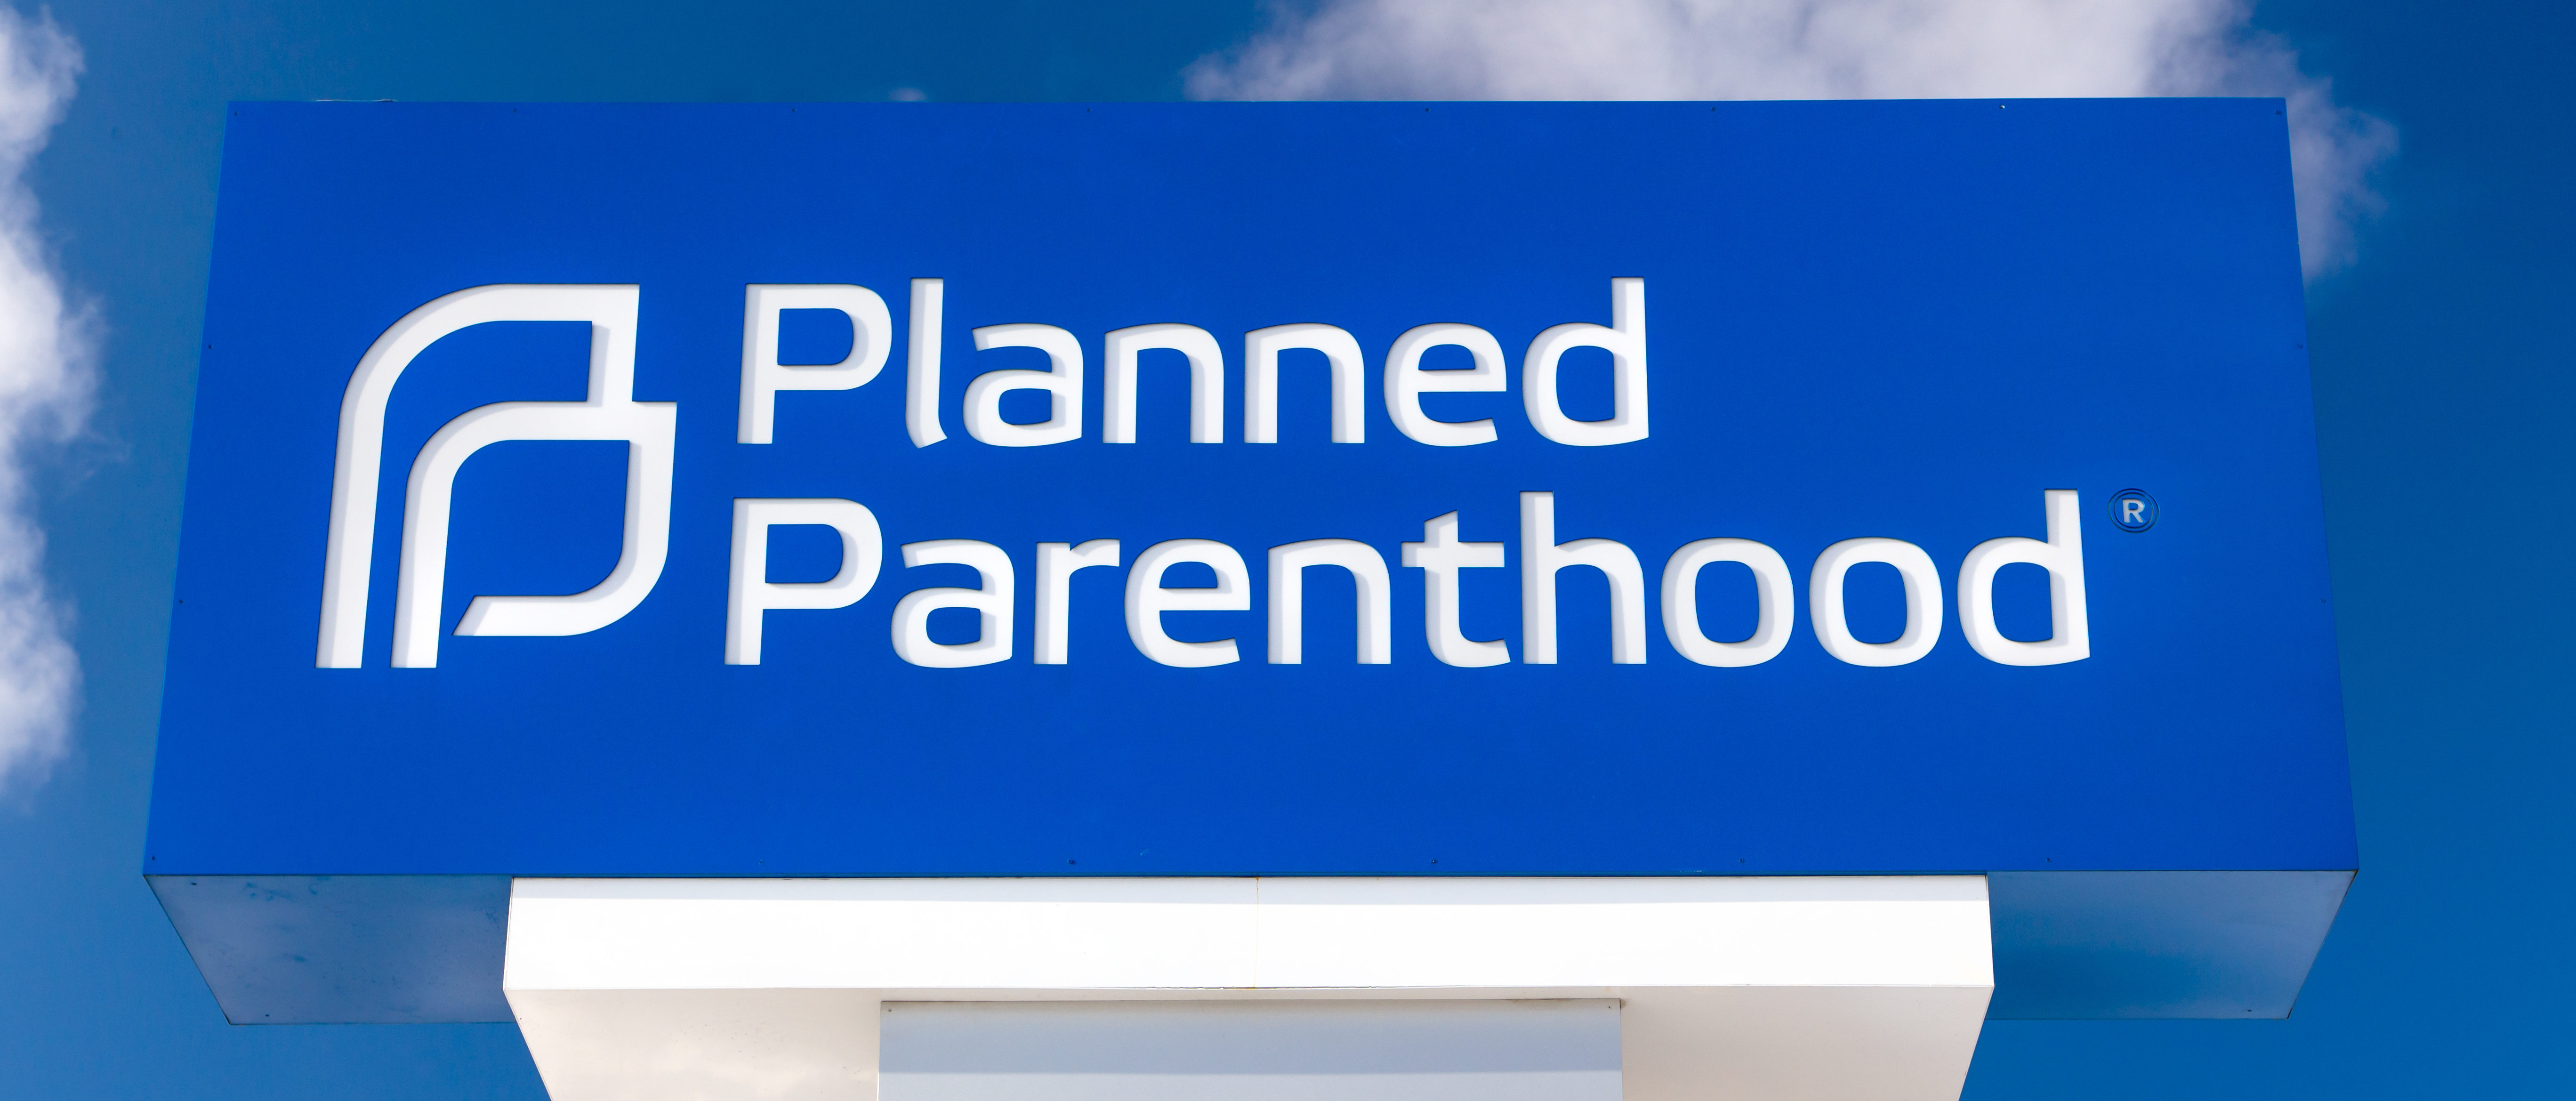 EXCLUSIVE: SBA Hid Comms With Planned Parenthood amid GOP criticism of PPP loans